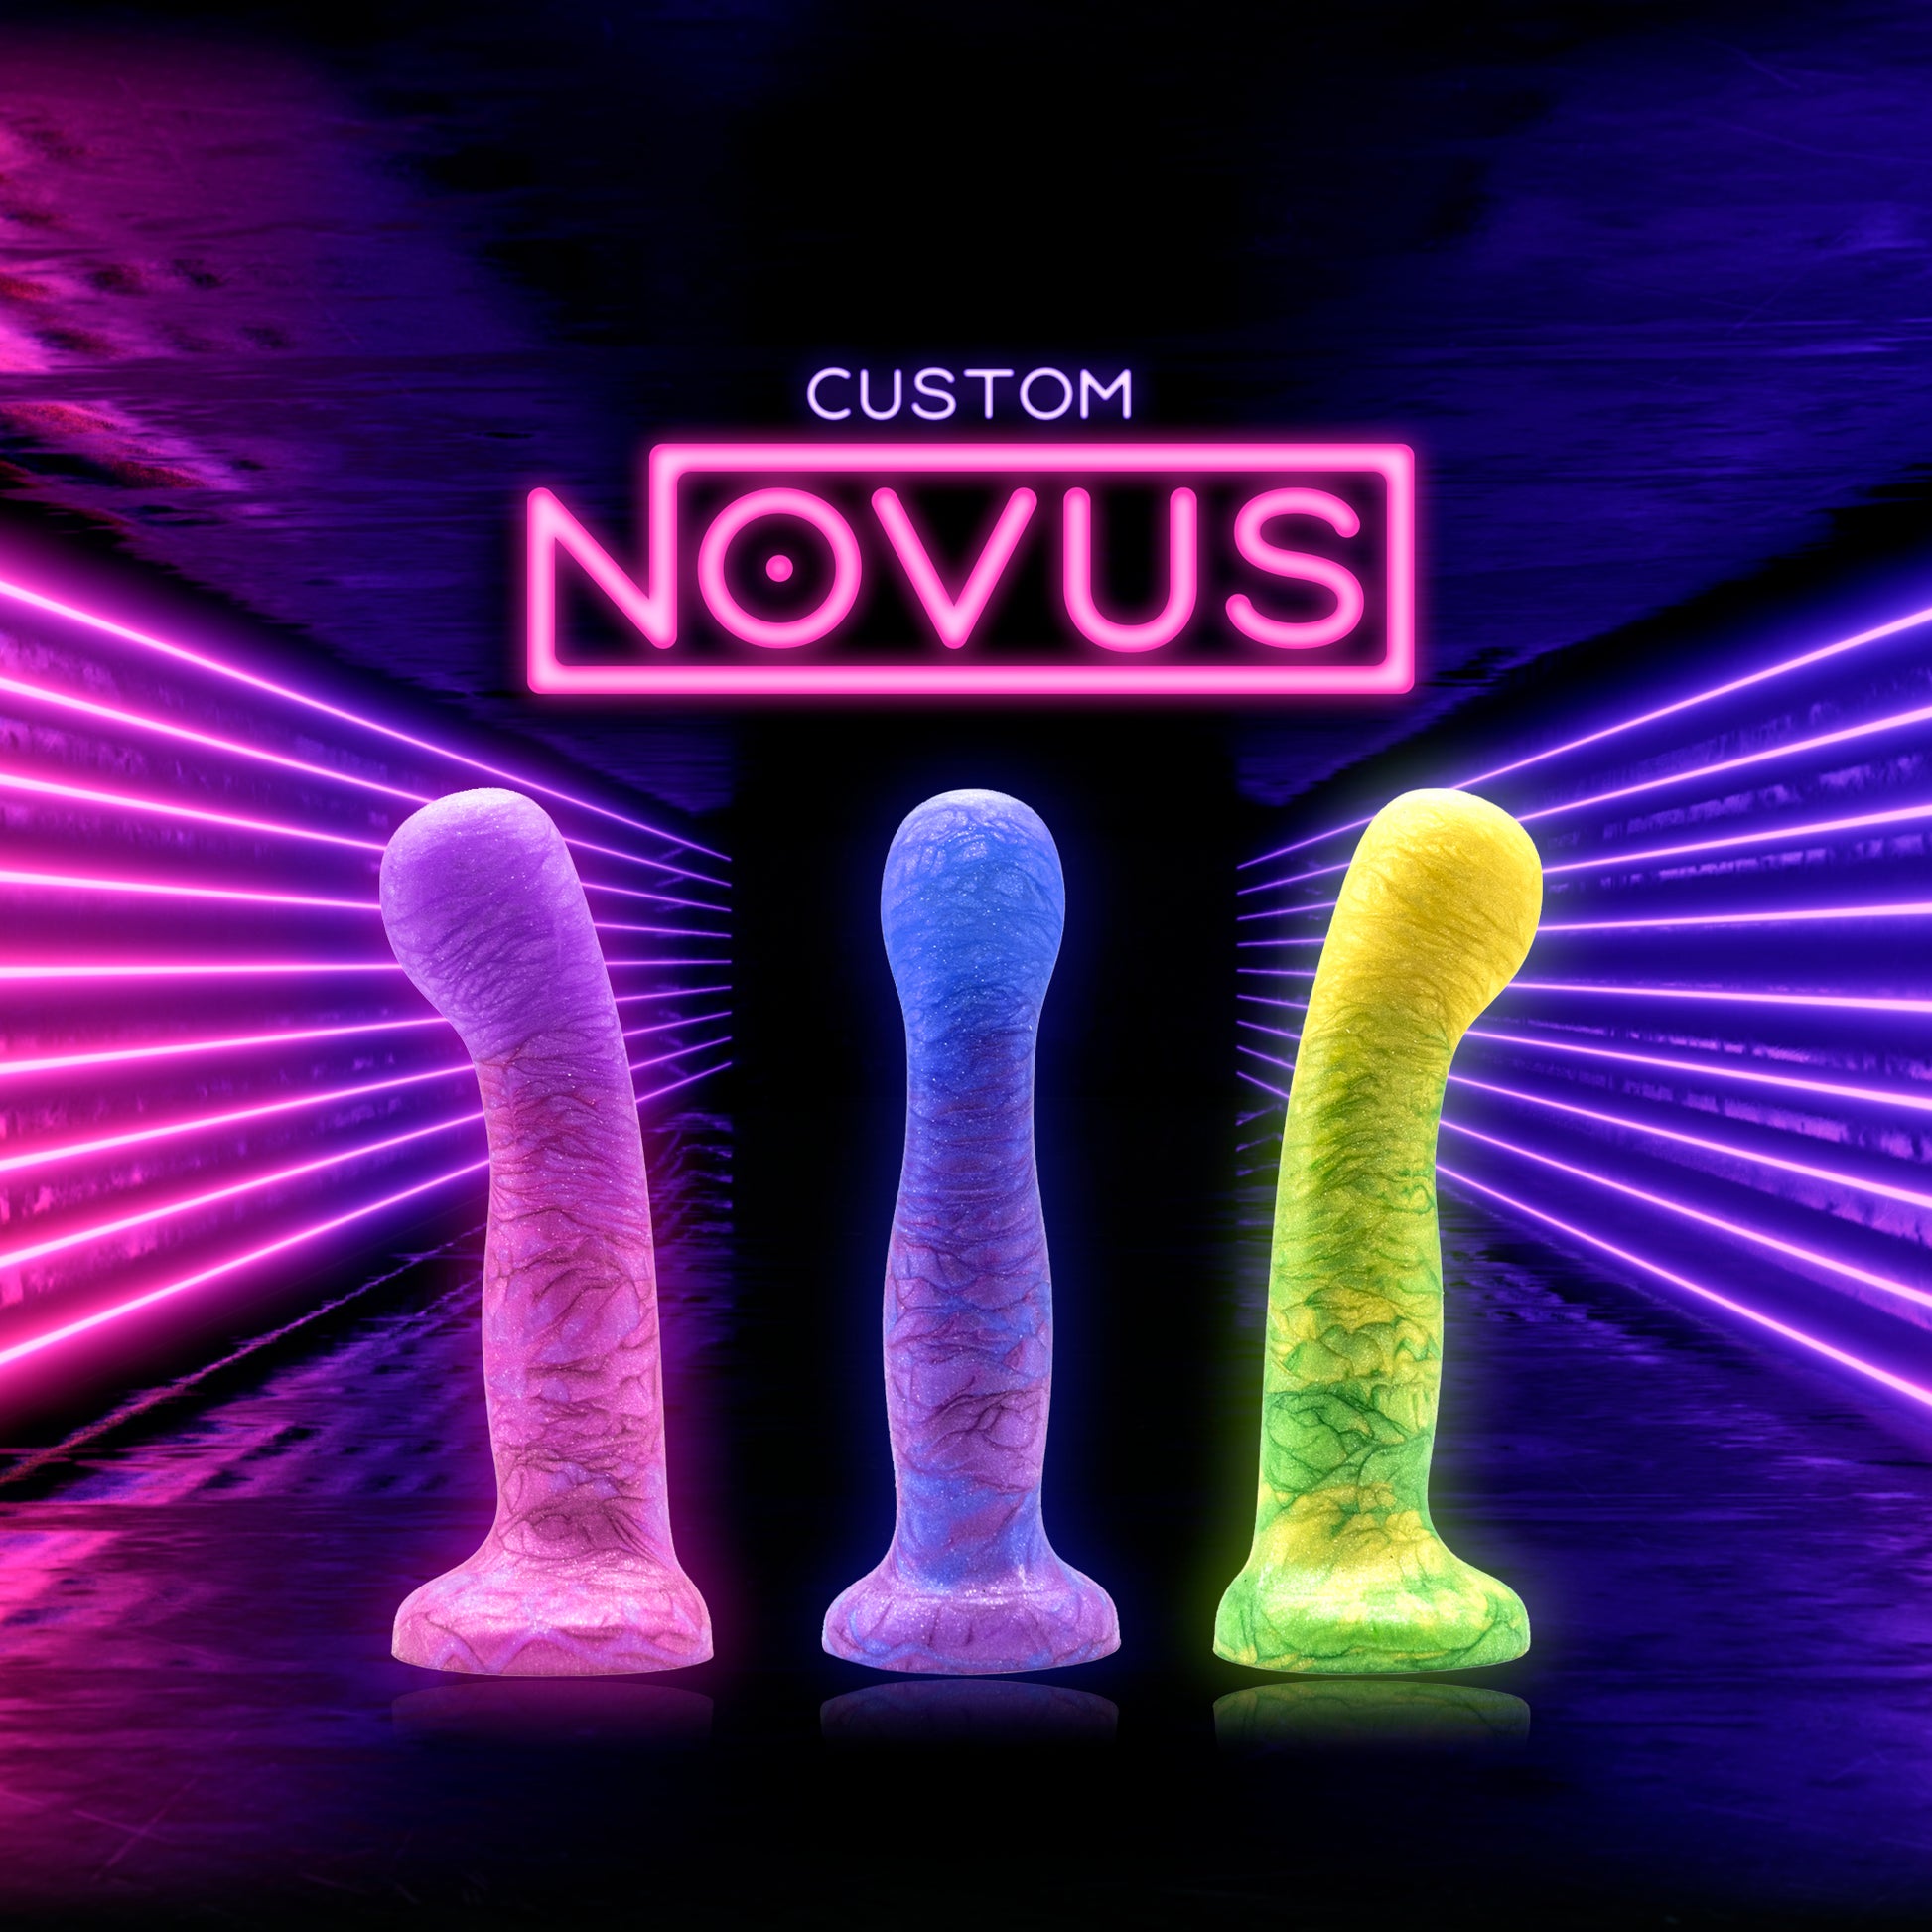 NOVUS is a fantasy dildo with a sleek, yet futuristic design. This fantasy dildo features a bulbous rounded tip that gradually contours into a thinner upper shaft, before flaring out into a gentle knot.